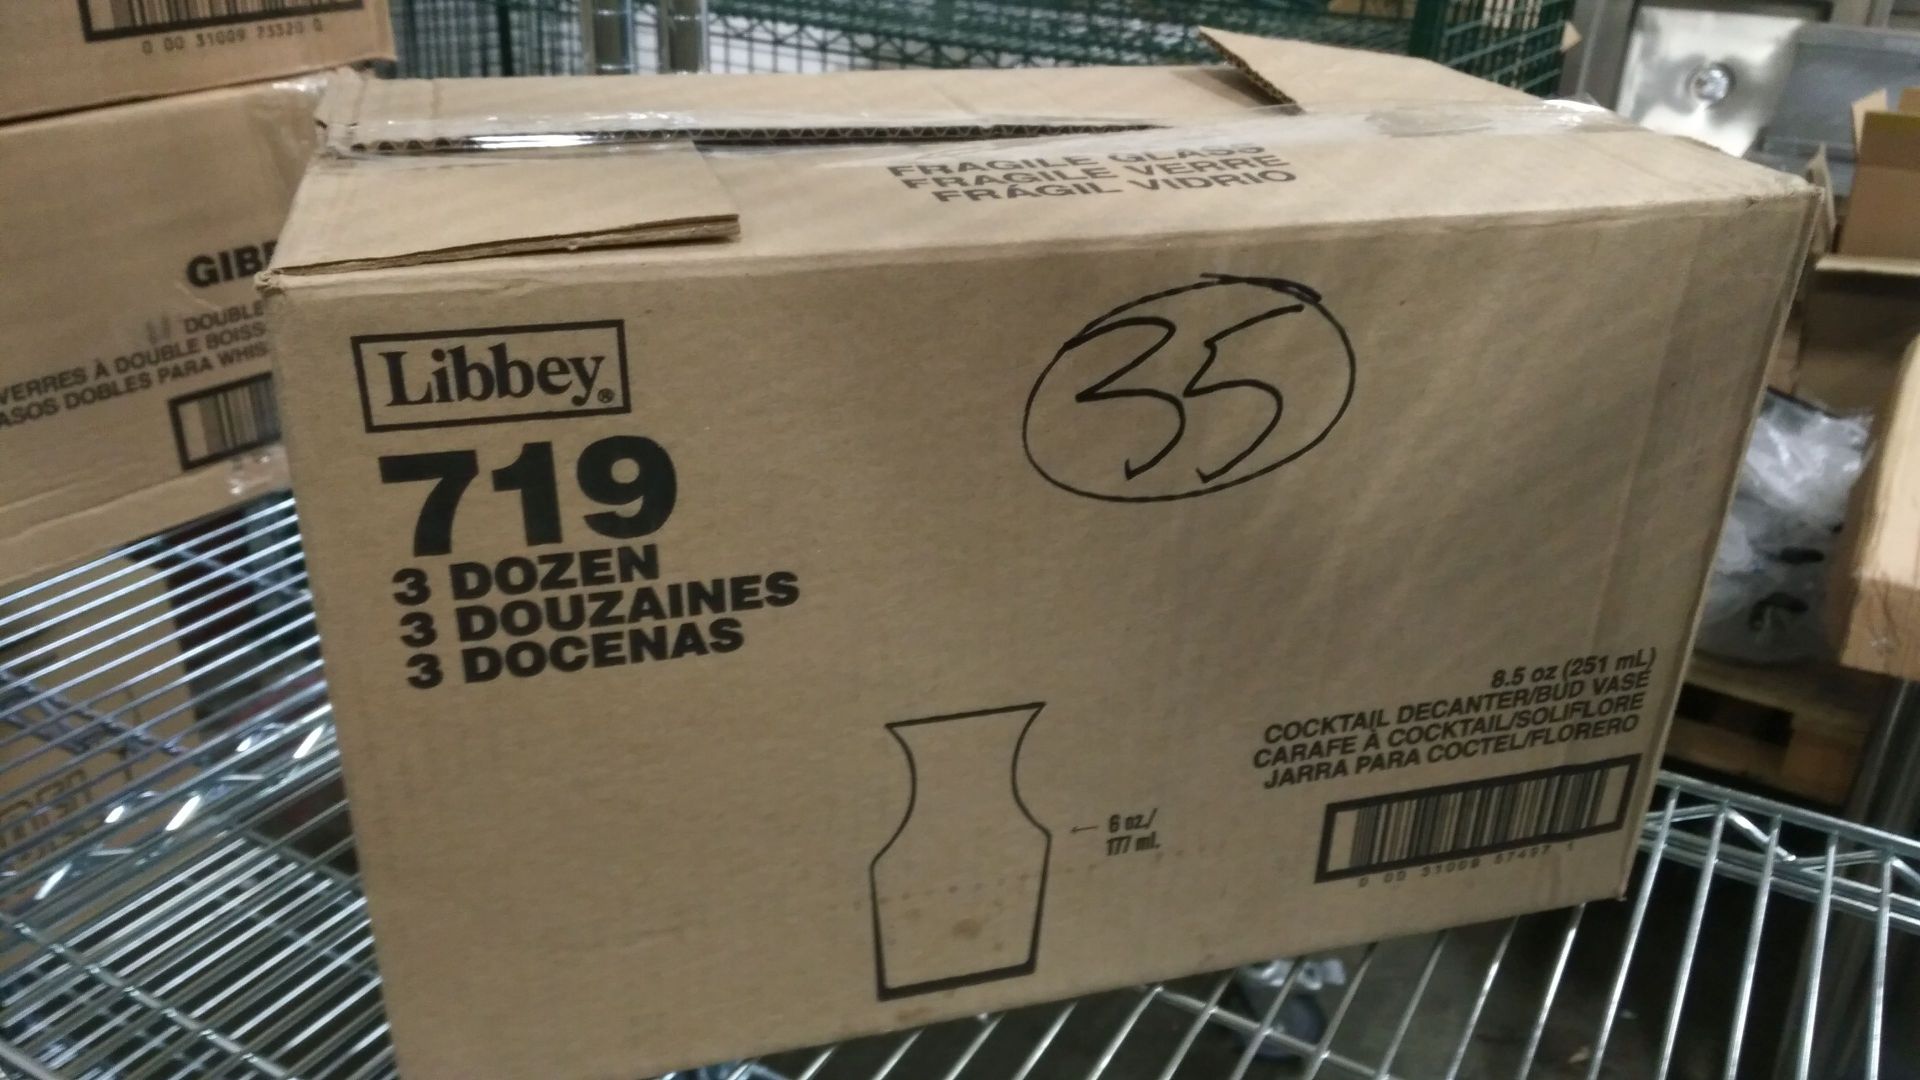 Libbey 8.5oz Glass Cocktail Decanters - Lot of 35 - Image 4 of 4